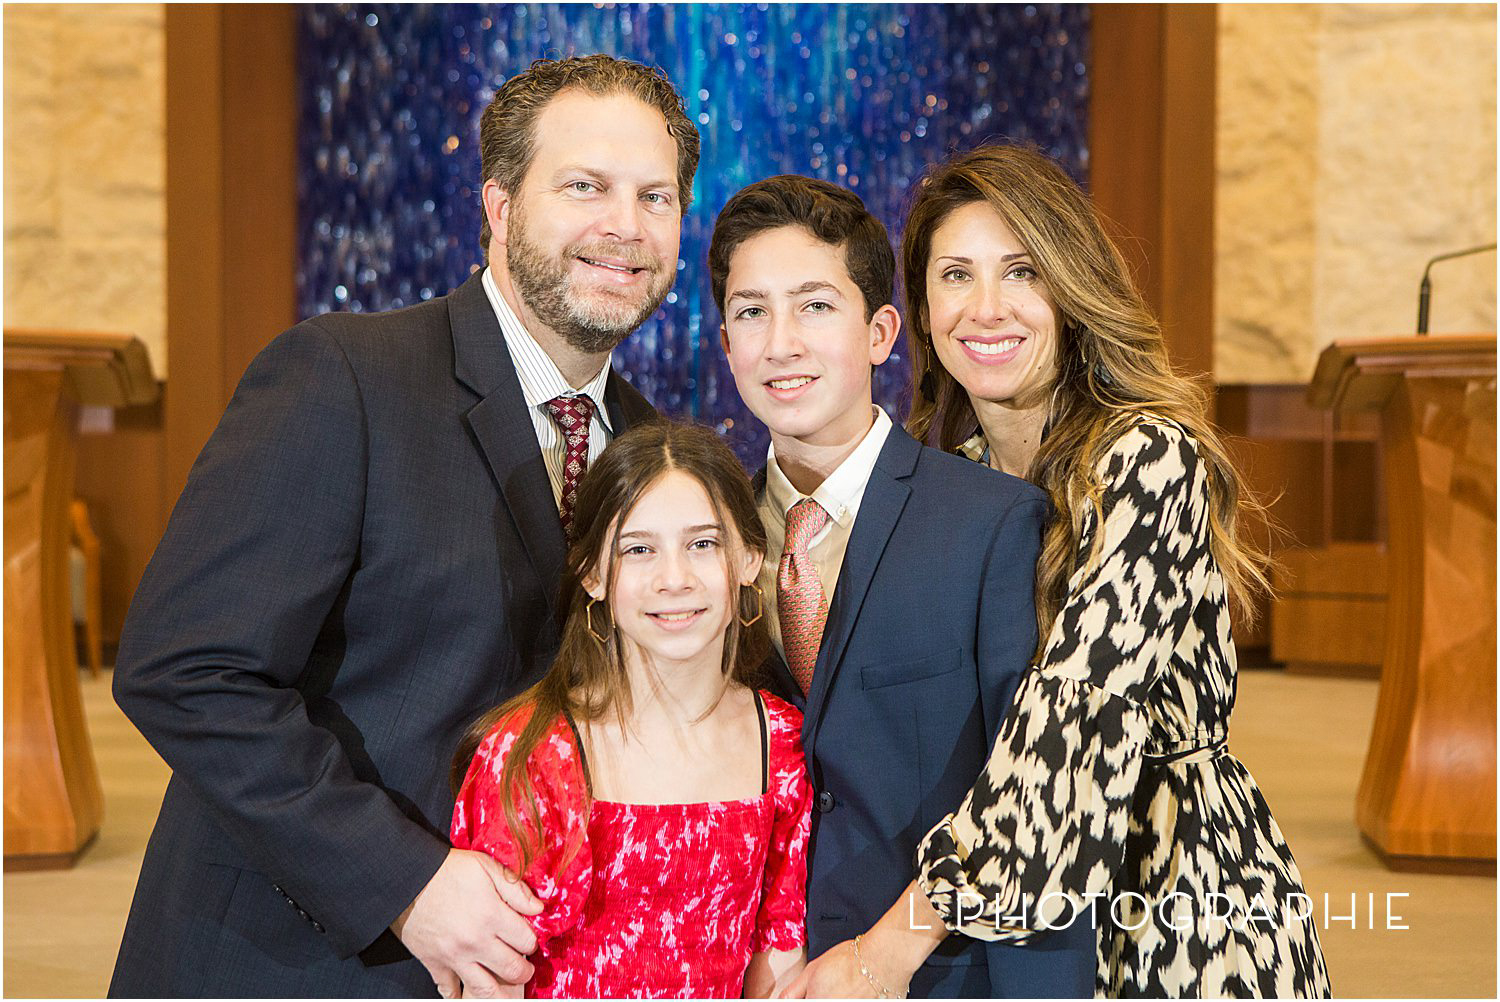 Jewish,L Photographie,L Photographie bar mitzvah,L Photographie bat mitzvah,L Photographie mitzvahs,Lester's Sports Bar,Meredith Marquardt,Shaare Emeth,Simcha's Events,St. Louis bar mitzvah photographer,St. Louis bat mitzvah photographer,Torah,Torah reading,bar mitzvah,bar mitzvah photographer,bat mitzvah,bat mitzvah photographer,best St. Louis mitzvah photographer,female photographer,mazel tov,milestone photos,mitzvah,mitzvah photographer in St. Louis,must be a Simcha event,sports,sports theme,teen,teen boy,teen party,